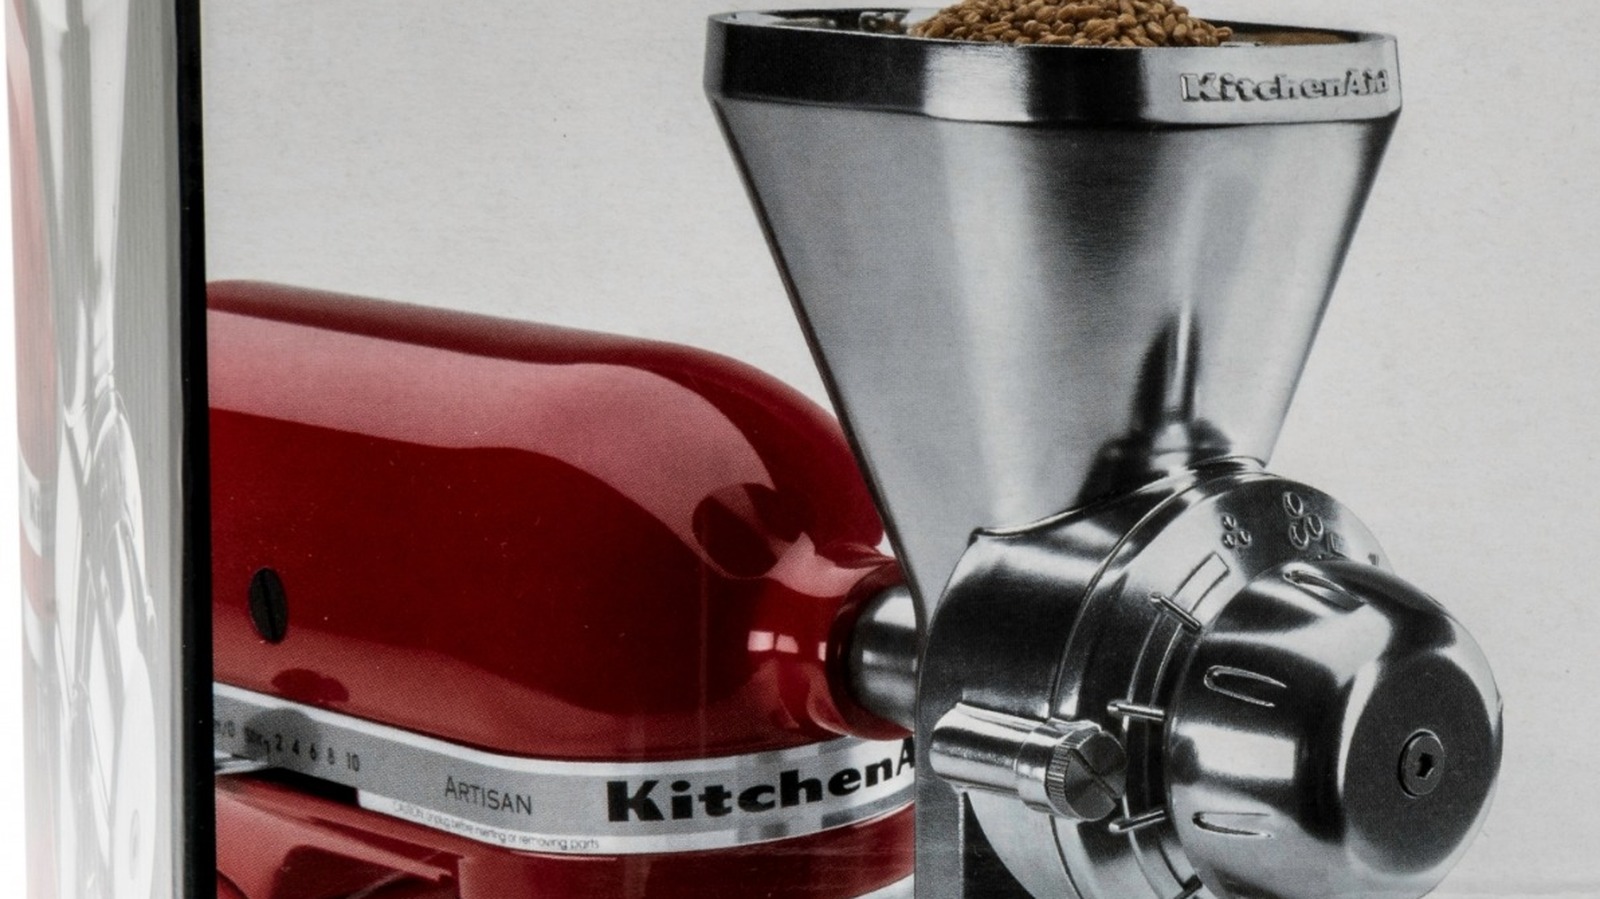 Use Your Stand Mixer To Up Your Baking Game By Milling Your Own Flour